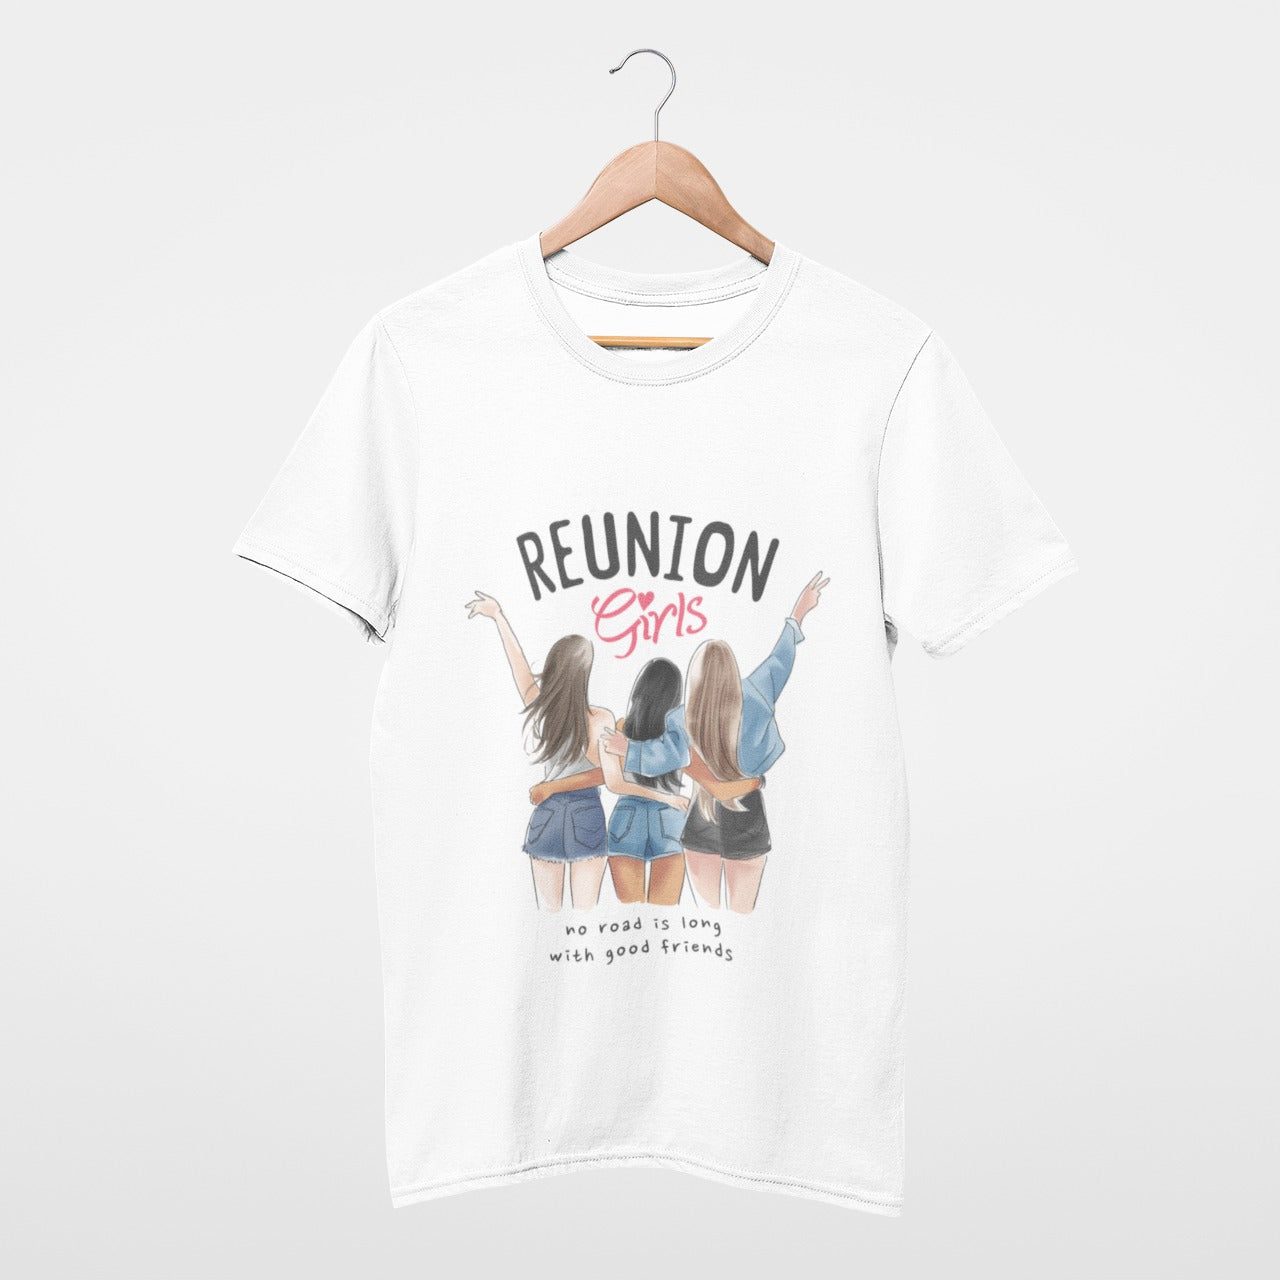 Reunion Girls, no road is long with good friends Tee